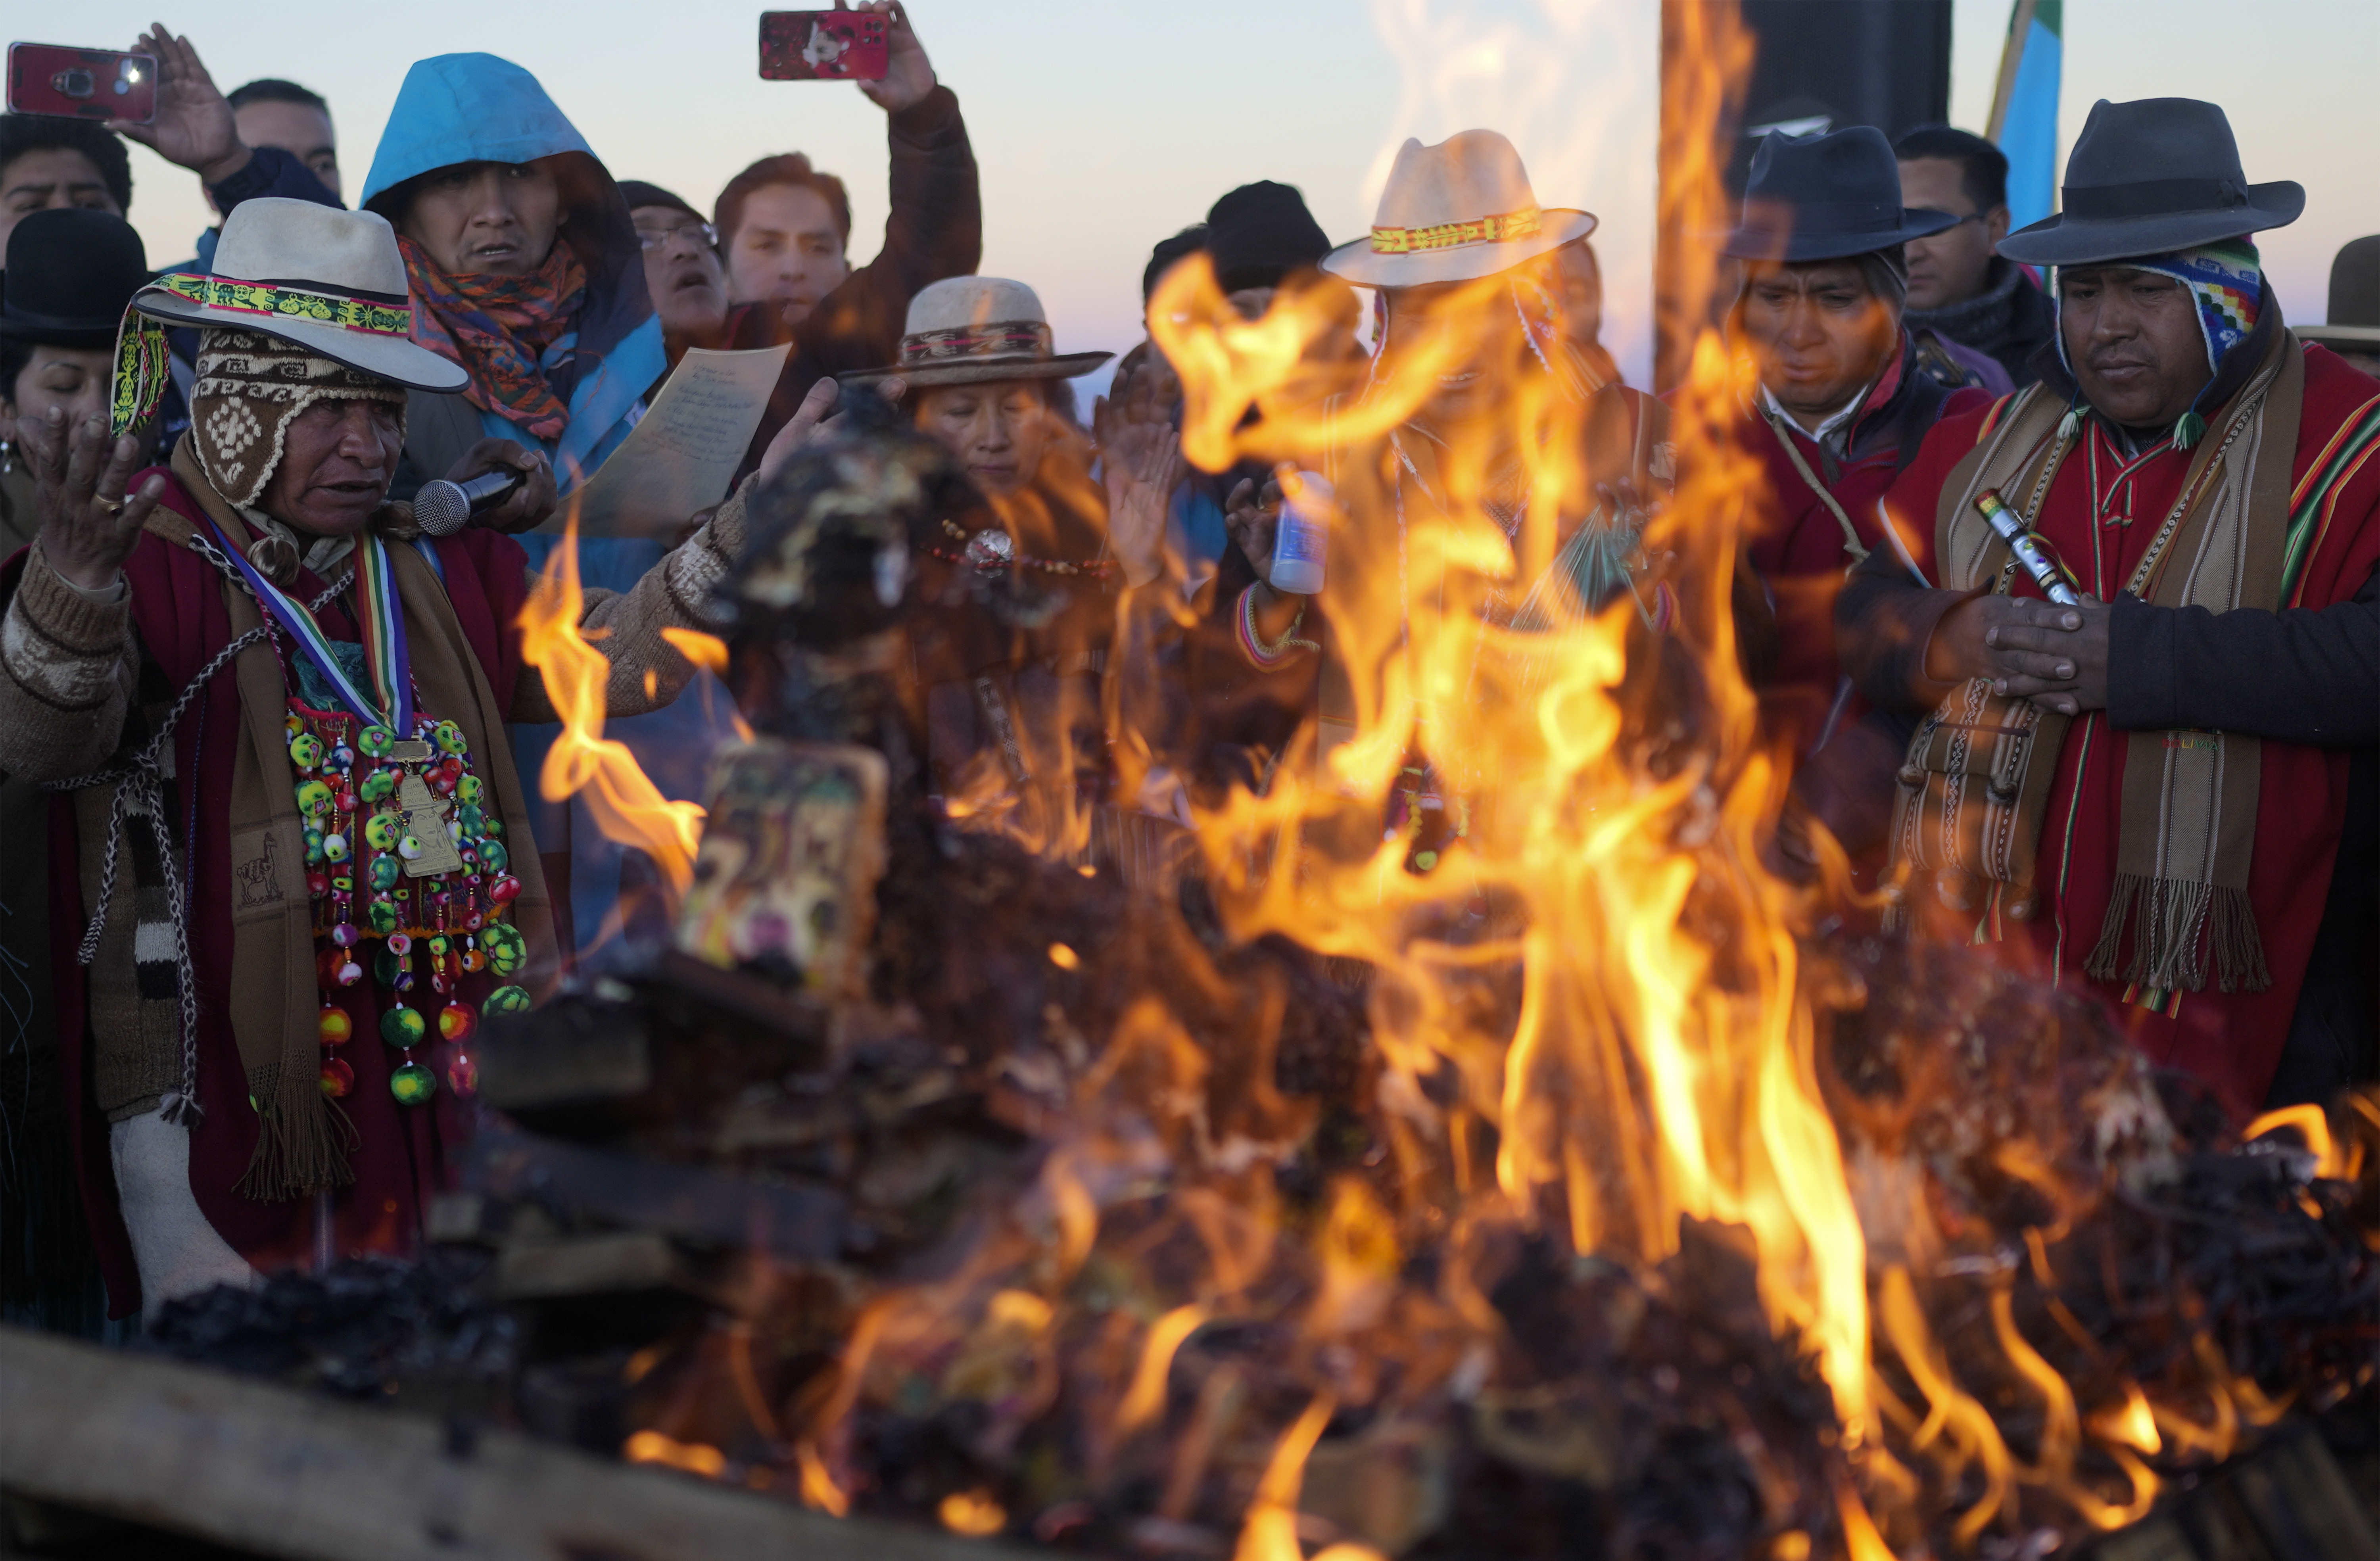 Aymara Indigenous burn offerings in honor of Pachamama or Mother Earth, after receiving the first rays of sunlight in a New Year's ritual on the sacred mountain Apacheta Murmutani on the outskirts of Hampaturi, Bolivia, early Wednesday, June 21, 2023. Aymara Indigenous communities are celebrating the Andean new year 5,531 or 